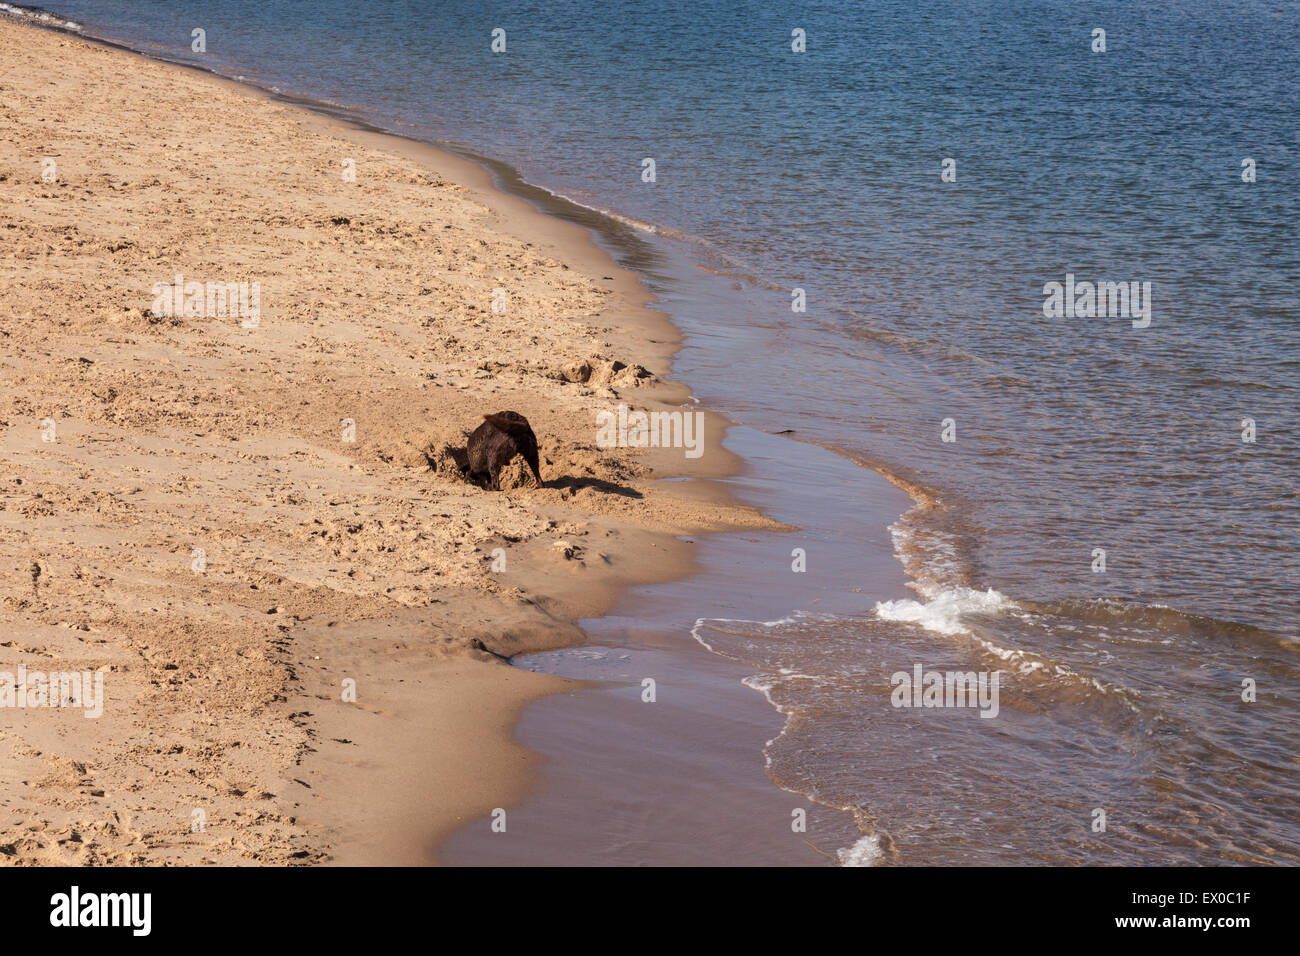 A dog digs in the sand on the River Tyne at North Shields, Newcastle, Tyne and Wear, England, UK Stock Photo